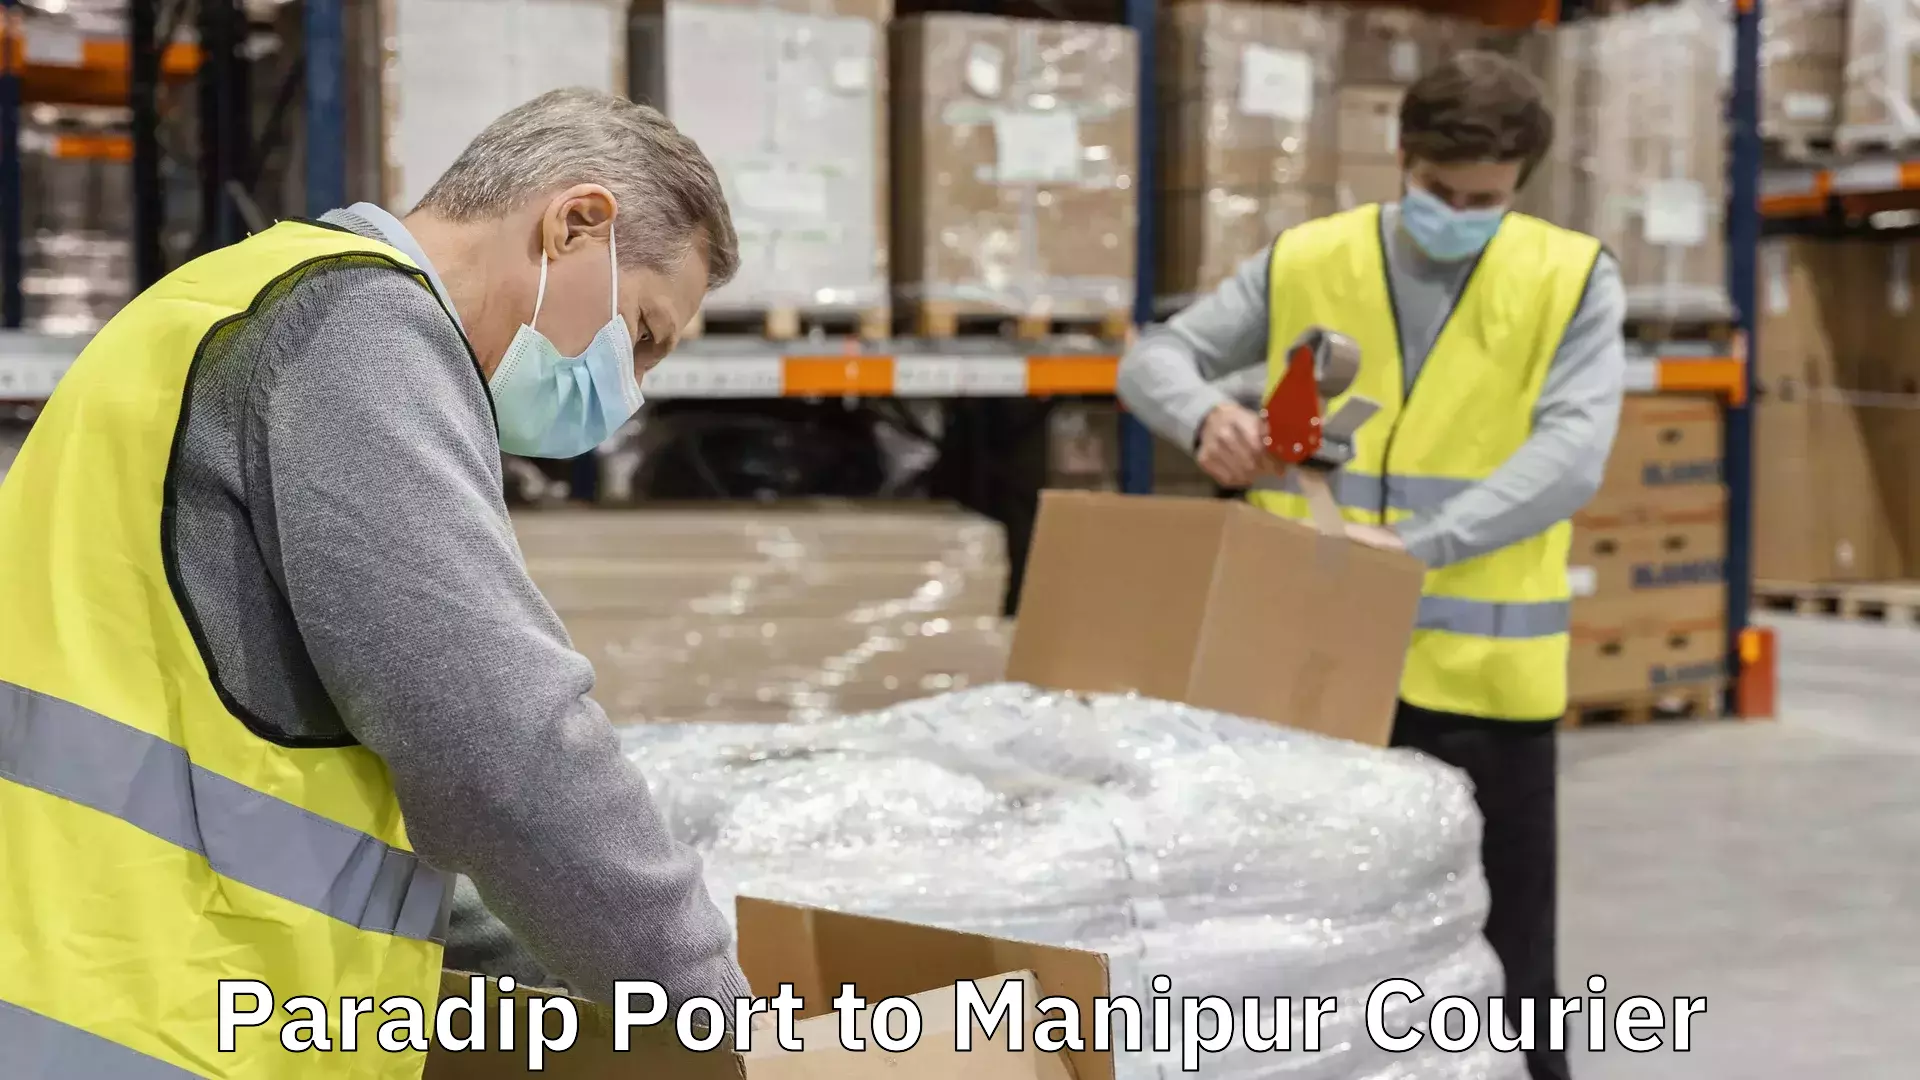 Doorstep delivery service Paradip Port to Manipur